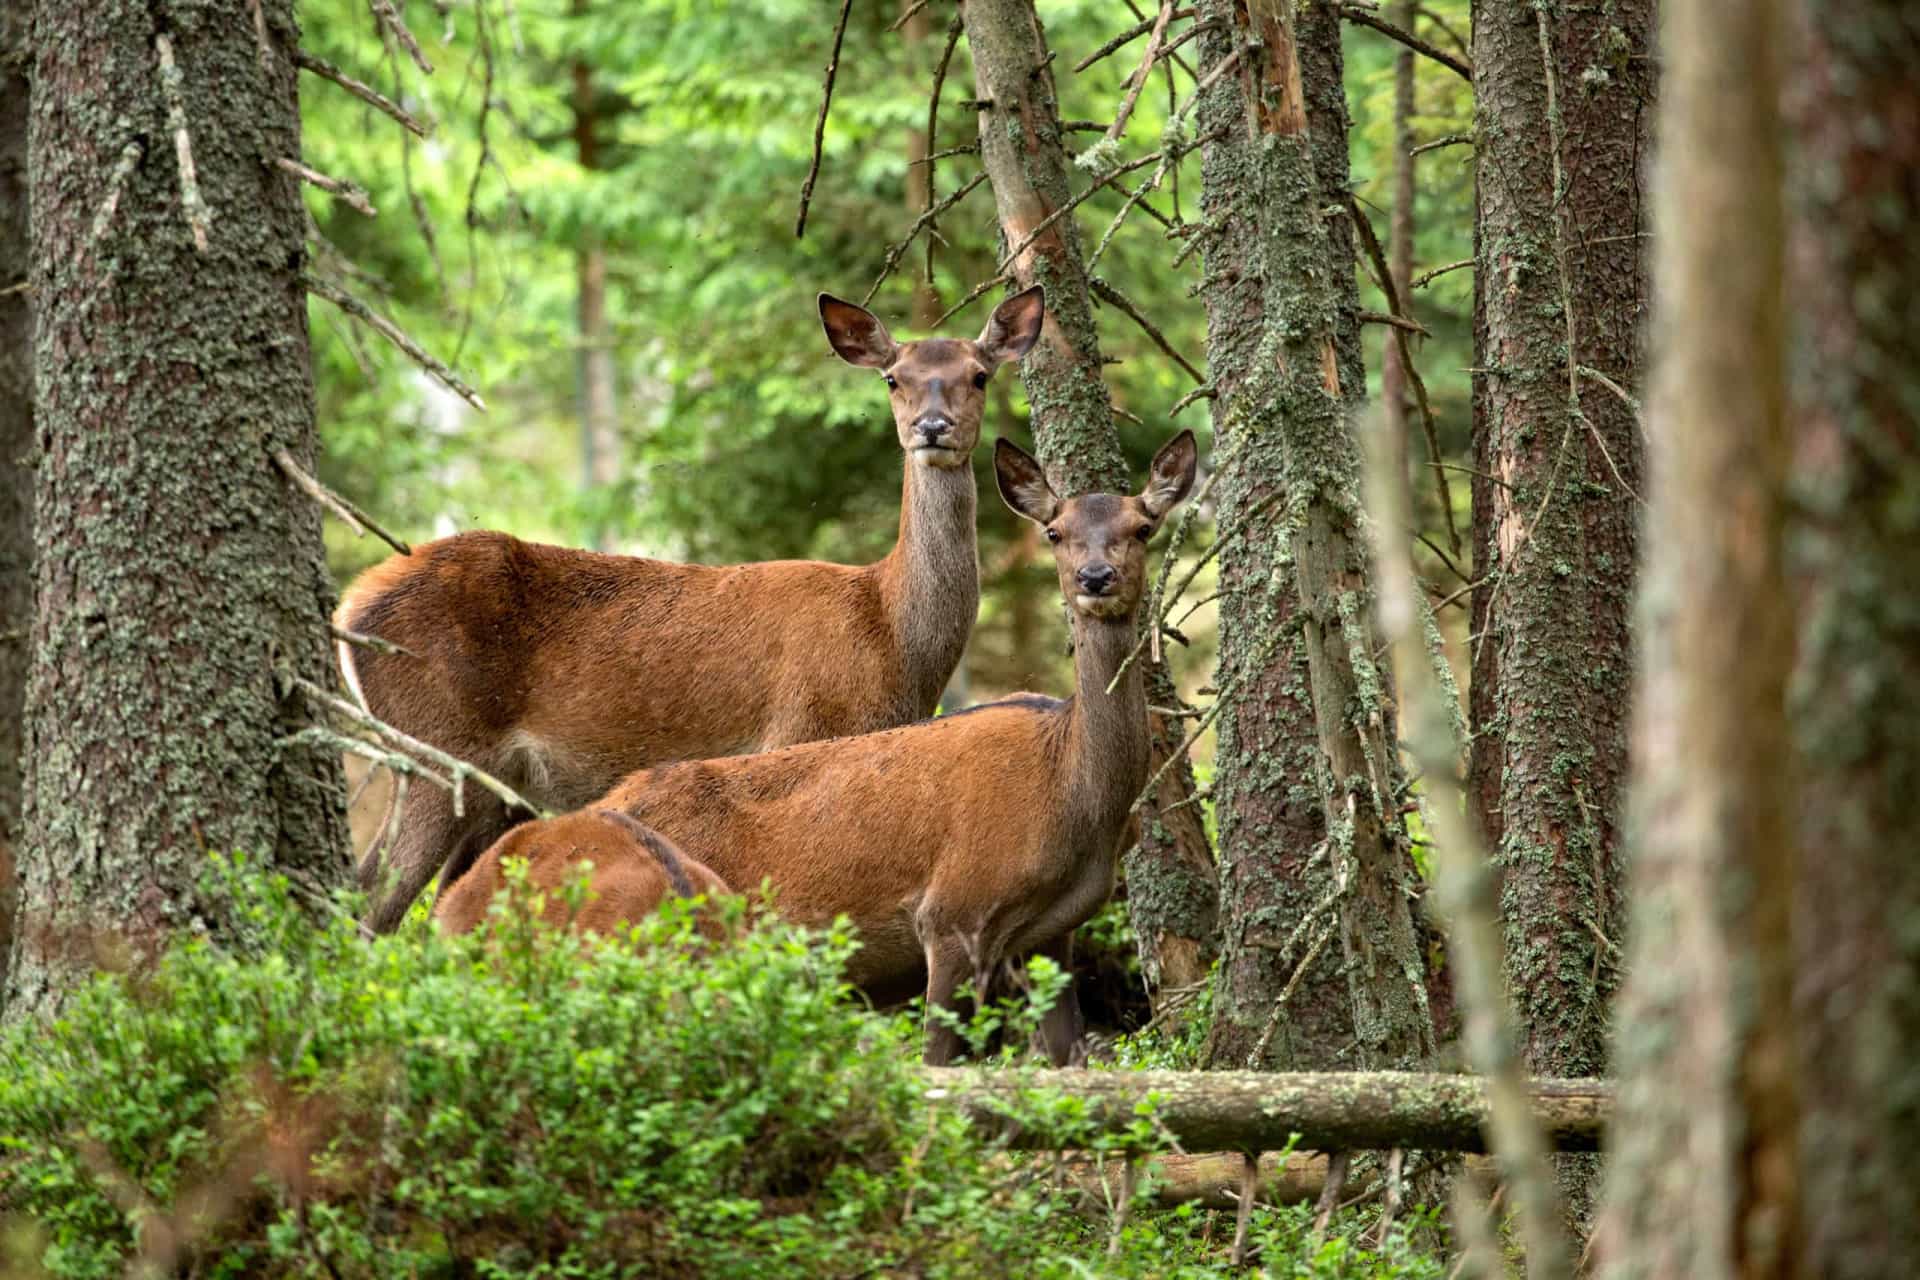 <p>After the electrified border fence separating the Soviet Union from the rest of Europe was dismantled in 1991, deer in the Czech Republic refused to cross the imaginary line along which the barricade once stood. Even today, these animals remain cautious of the frontier.</p><p>Sources: (<a href="https://www.history.com/news/bay-of-pigs-mistakes-cuba-jfk-castro" rel="noopener">History</a>) (<a href="https://www.livescience.com/tsar-bomba-secret-test-footage-declassified.html" rel="noopener">Live Science</a>) (<a href="https://www.autoweek.com/car-life/a1921896/chryslers-cold-warrior/" rel="noopener">Autoweek</a>) (<a href="https://web.archive.org/web/20210710213948/https://www.latinamericanstudies.org/cold-war/sovietsbomb.htm" rel="noopener">The Boston Globe</a>) (<a href="https://www.npr.org/sections/thetwo-way/2017/10/27/560345132/documents-offer-insights-into-soviet-view-of-jfks-assassination?t=1644926751787" rel="noopener">NPR</a>) (<a href="https://www.nbcnews.com/storyline/fidel-castros-death/fidel-castro-cia-s-7-most-bizarre-assassination-attempts-n688951" rel="noopener">NBC News</a>) (<a href="https://www.defense.gov/Multimedia/Photos/igphoto/2001080694/" rel="noopener">Department of Defense</a>) </p><p>See also: <a href="https://www.starsinsider.com/lifestyle/277470/the-worlds-most-notorious-spies">The world's most notorious spies</a></p>